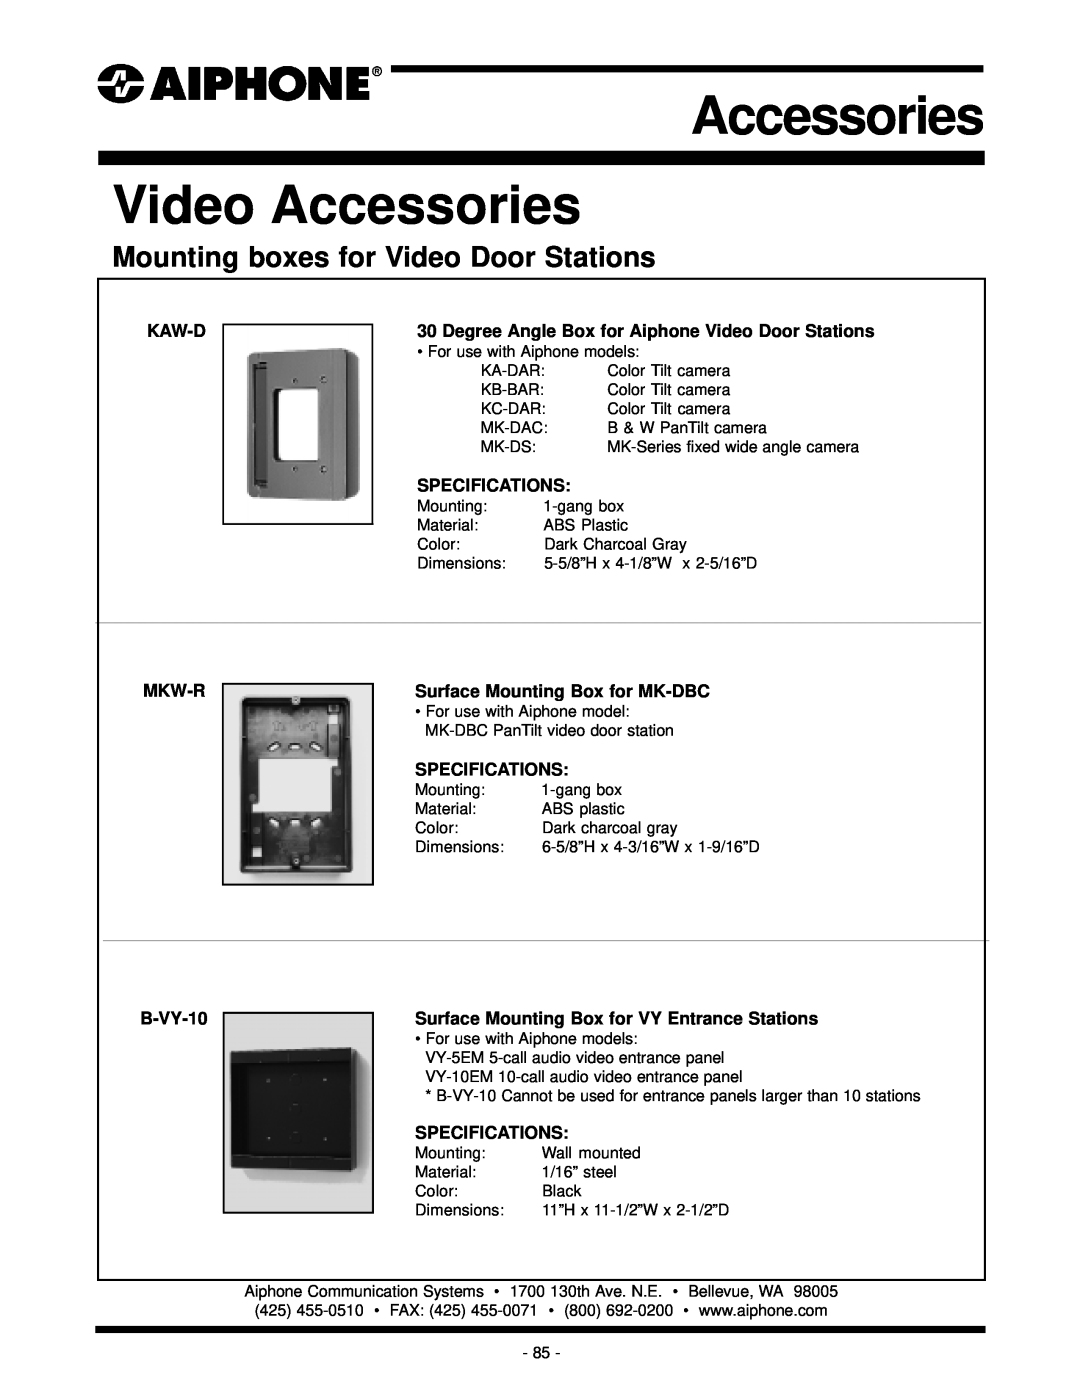 Aiphone KB-DAR Mounting boxes for Video Door Stations, Kaw-D, Specifications, Mkw-R, Surface Mounting Box for MK-DBC 